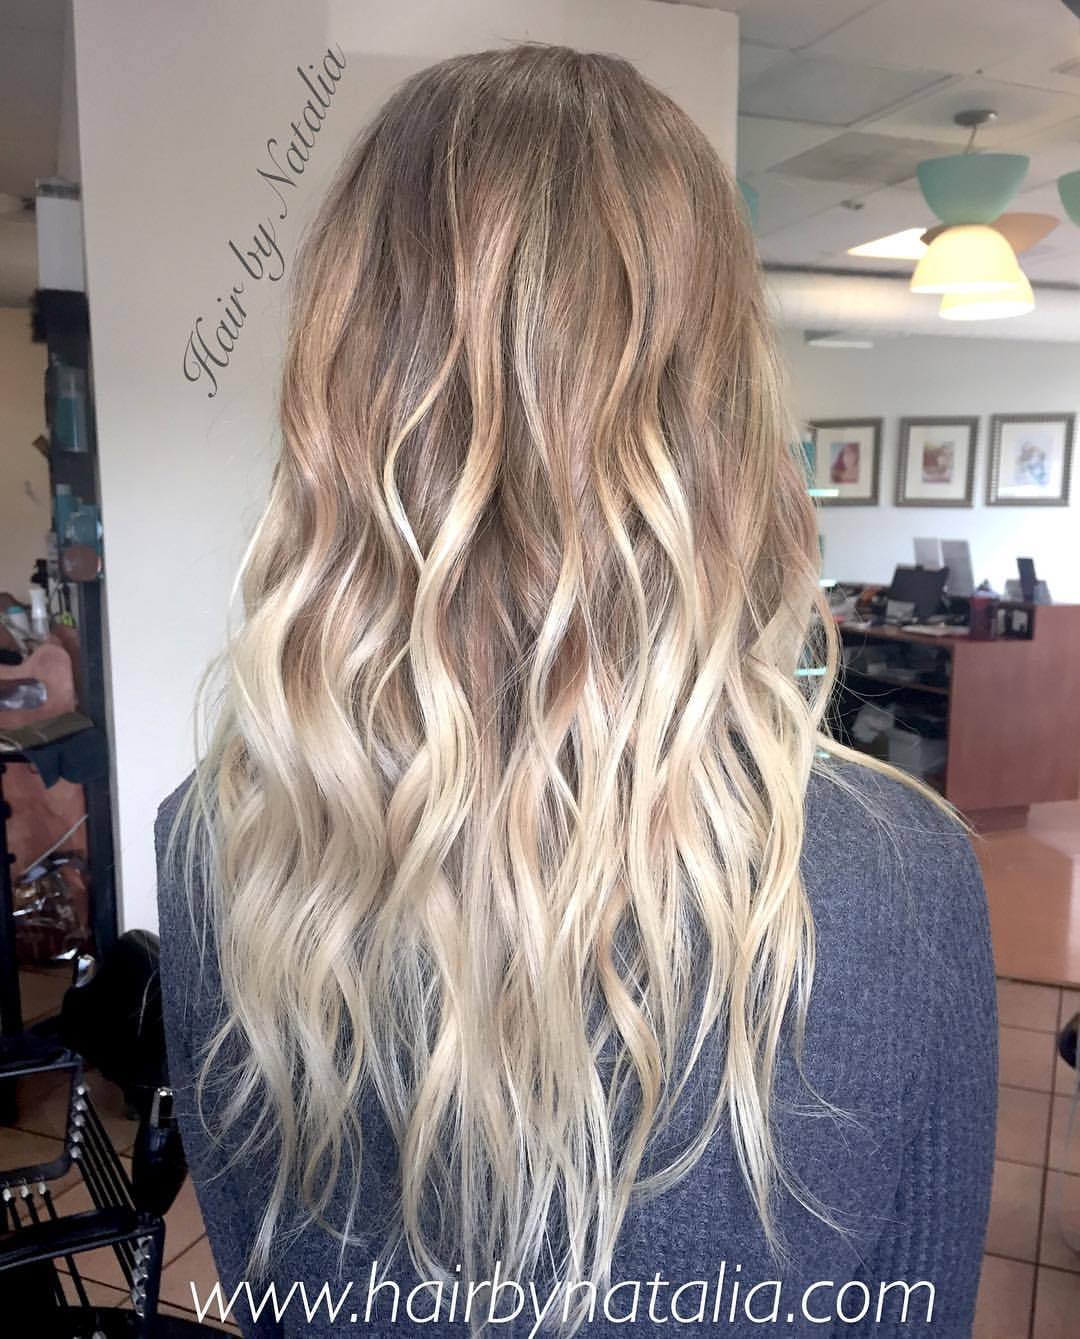 Balayage Hair Color — Sandy blonde Balayage. That is the end result...